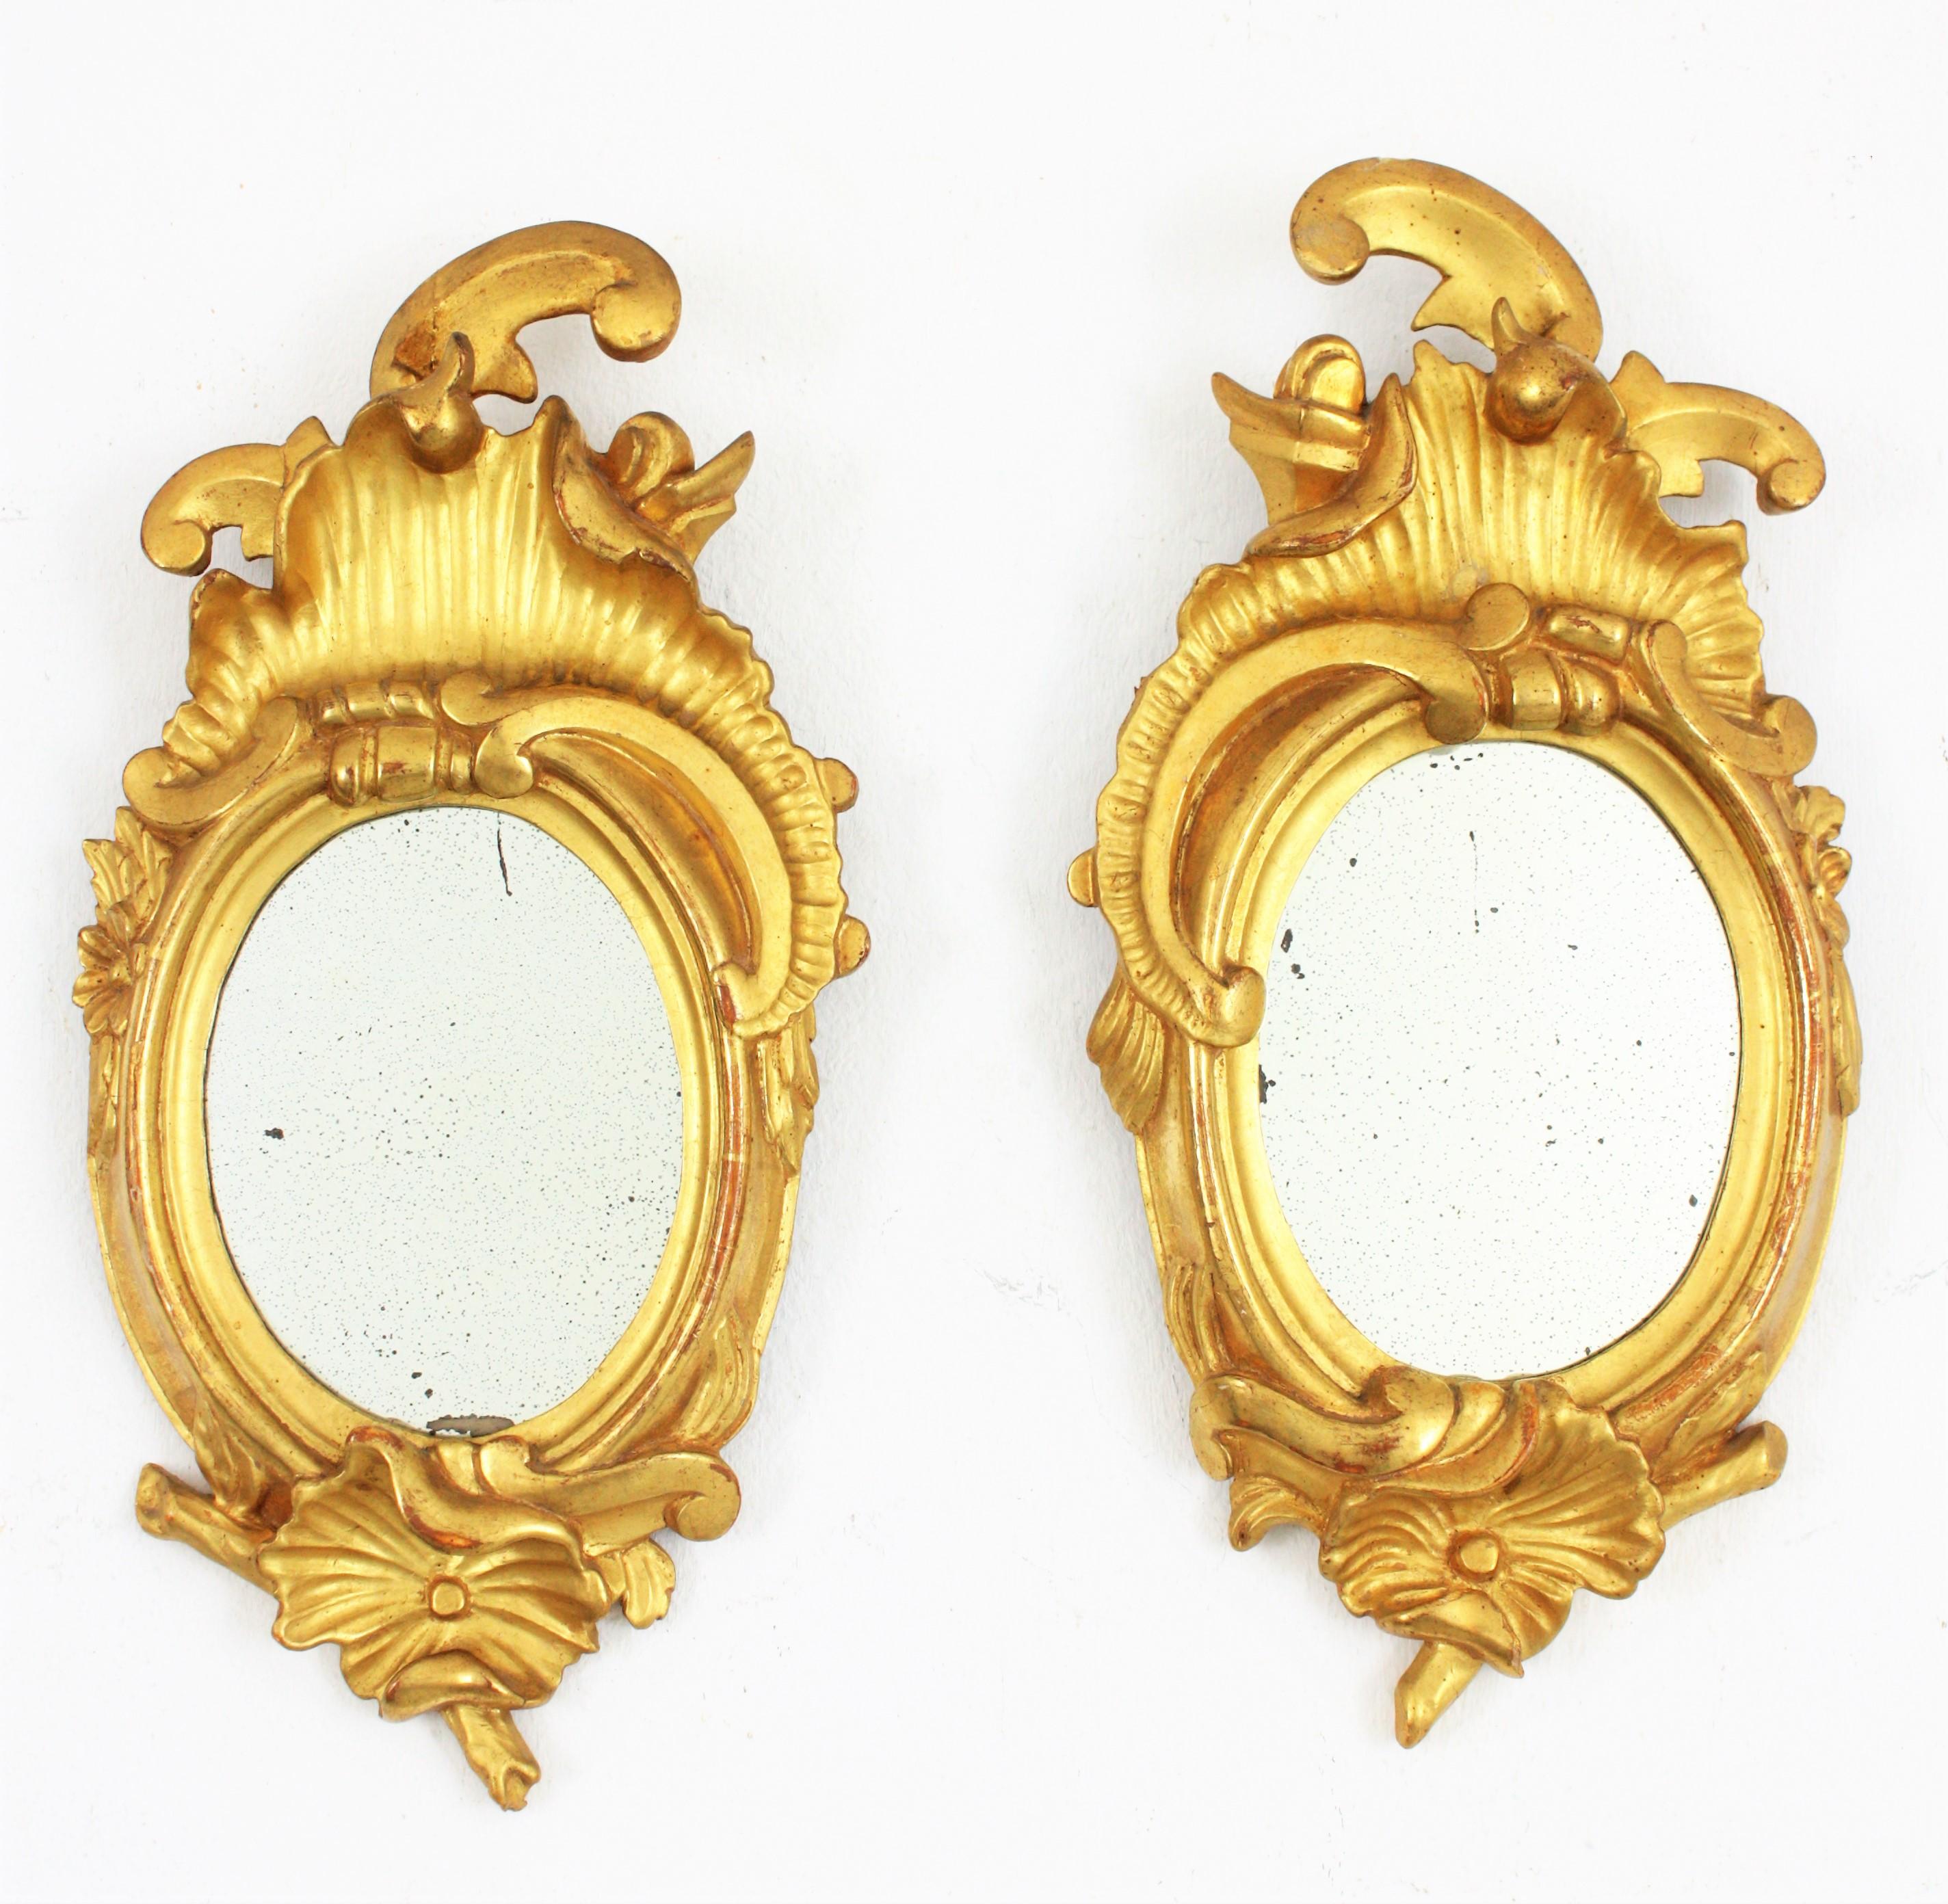 Pair of Art Nouveau Left and Right Gold Leaf Giltwood Mini Sized Mirrors
Exquisite and richly carved pair of left and right petite mirrors. Carved wood, covered with gesso and 24-karat gold leaf finishing. 
These small sized Art Nouveau carved